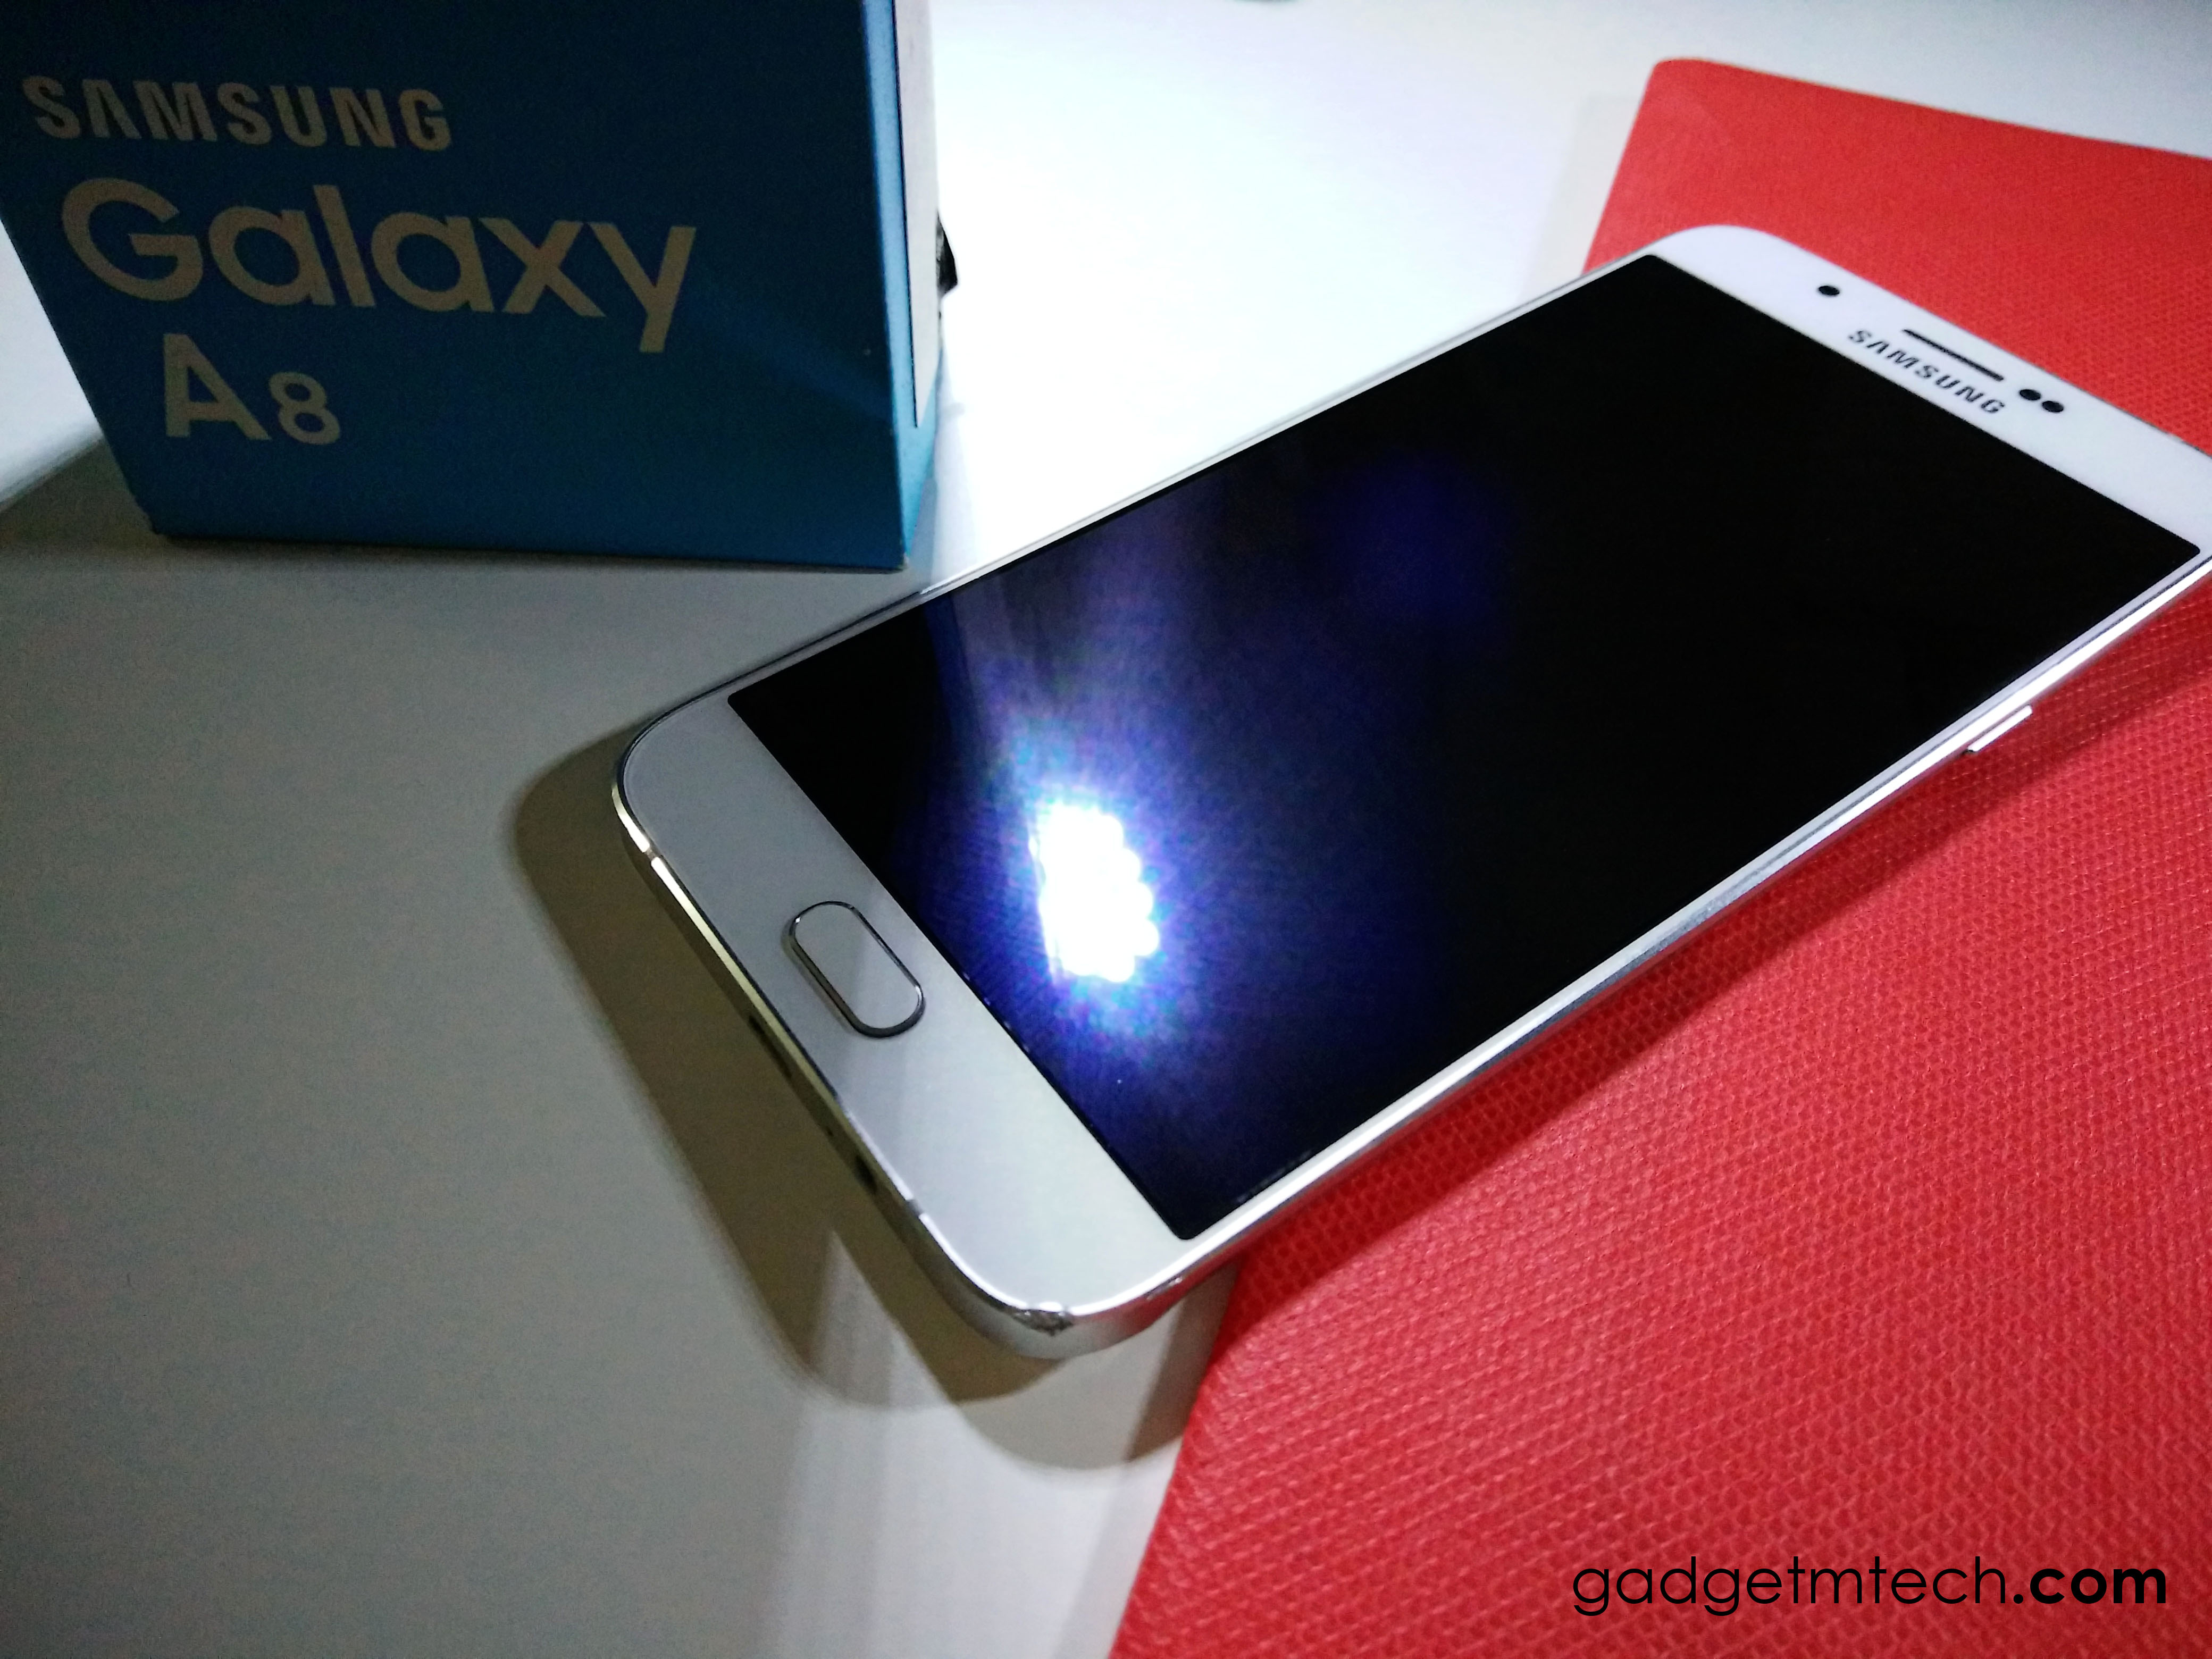 Samsung Galaxy A8 Review_1